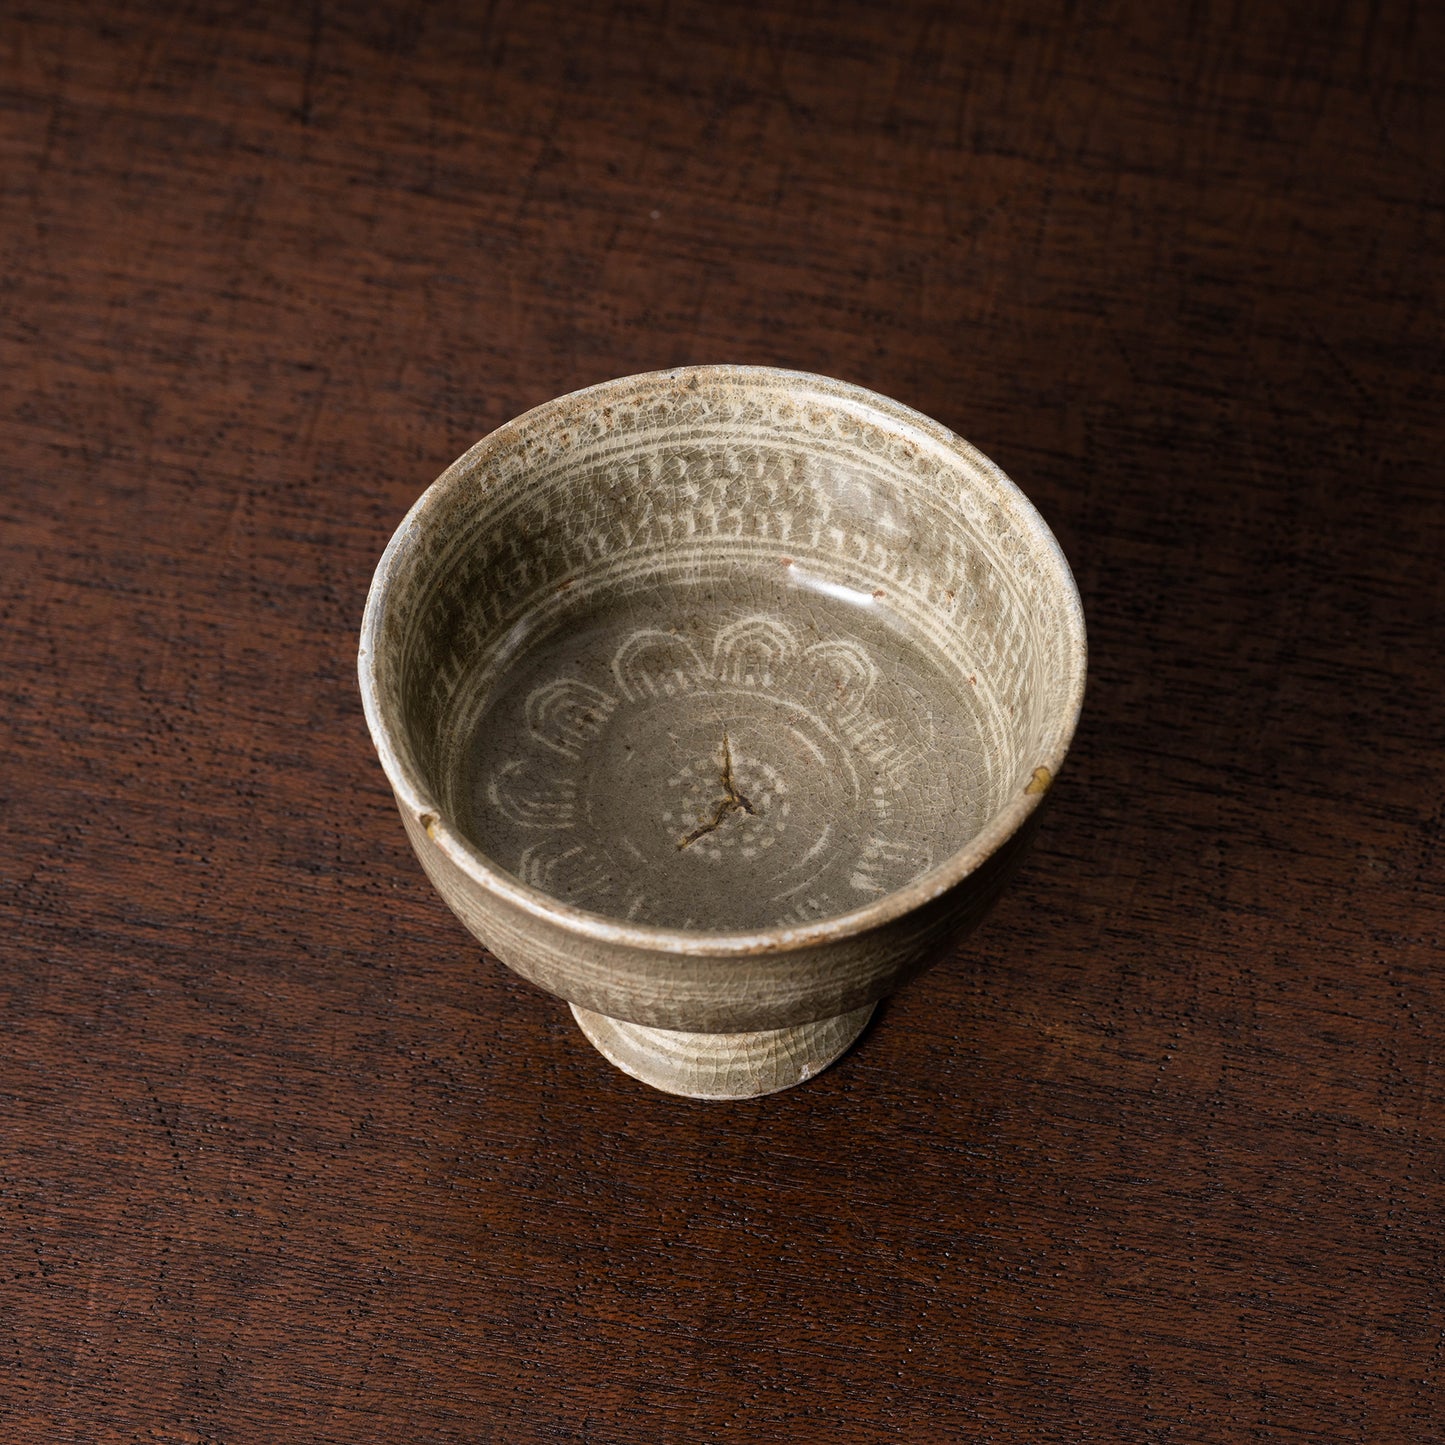 Goryeo Celadon Stem Cup with Inlaid Crane Design